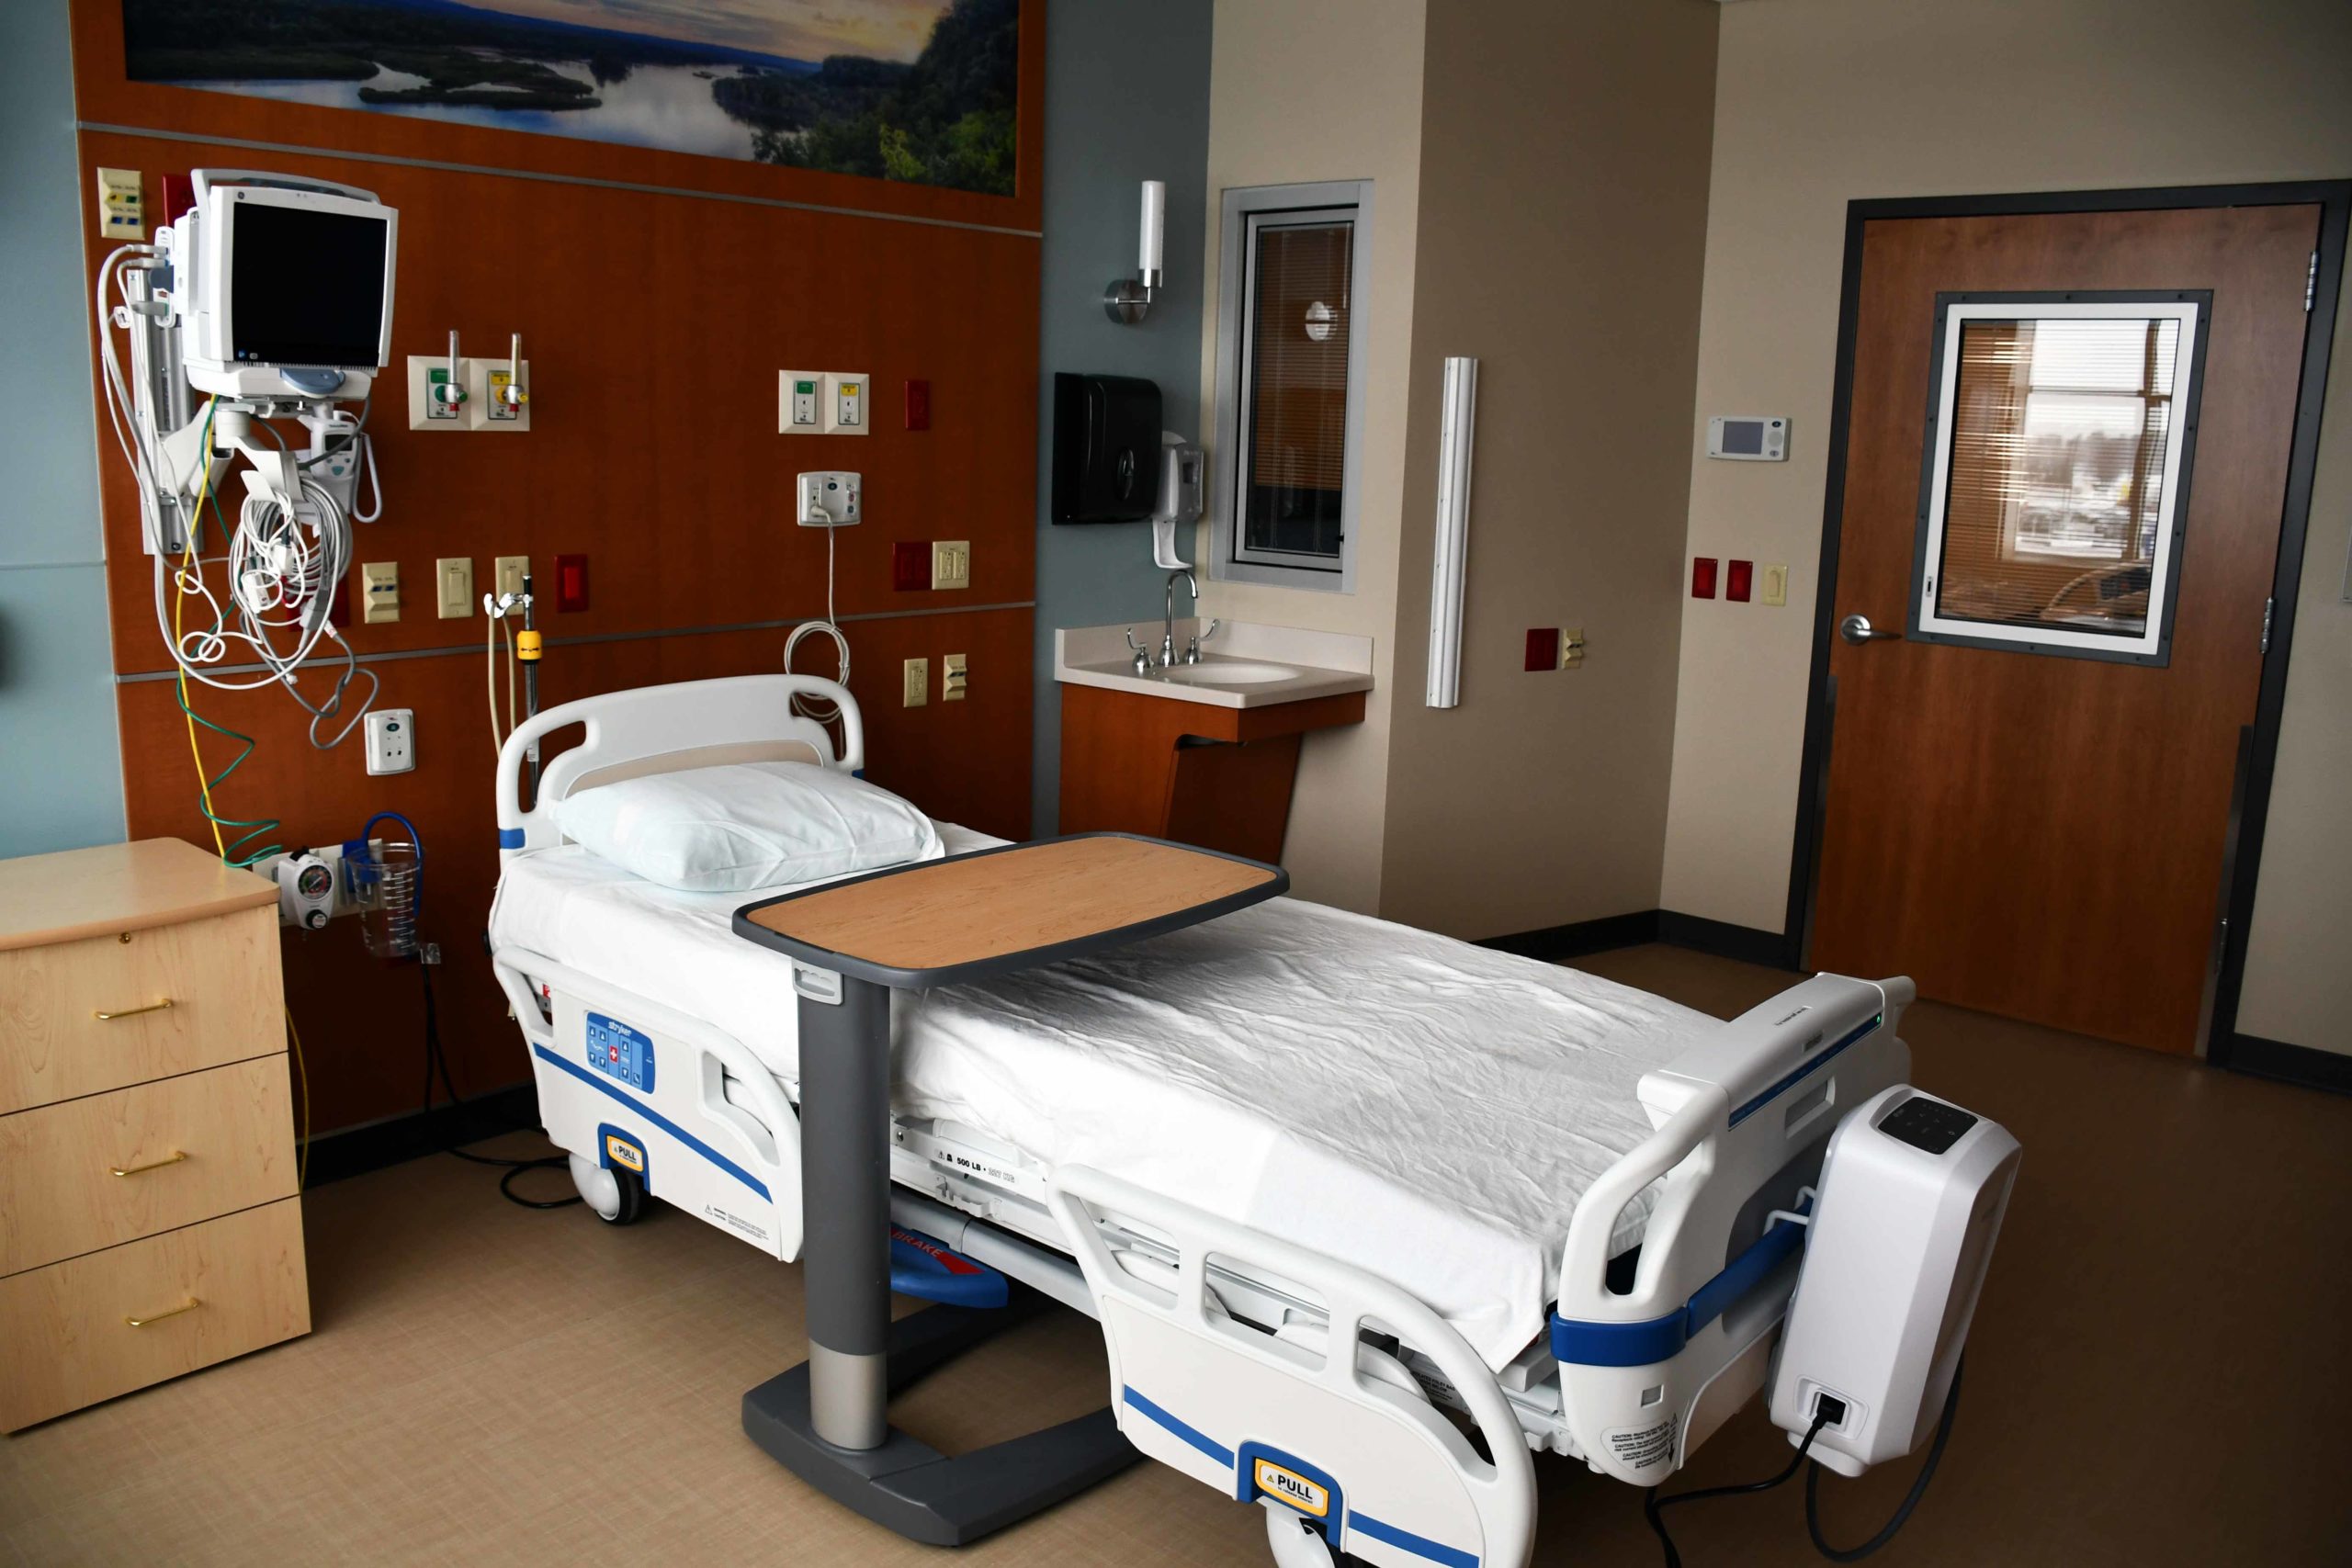 Aspirus plans to provide hospital care at Stevens Point campus